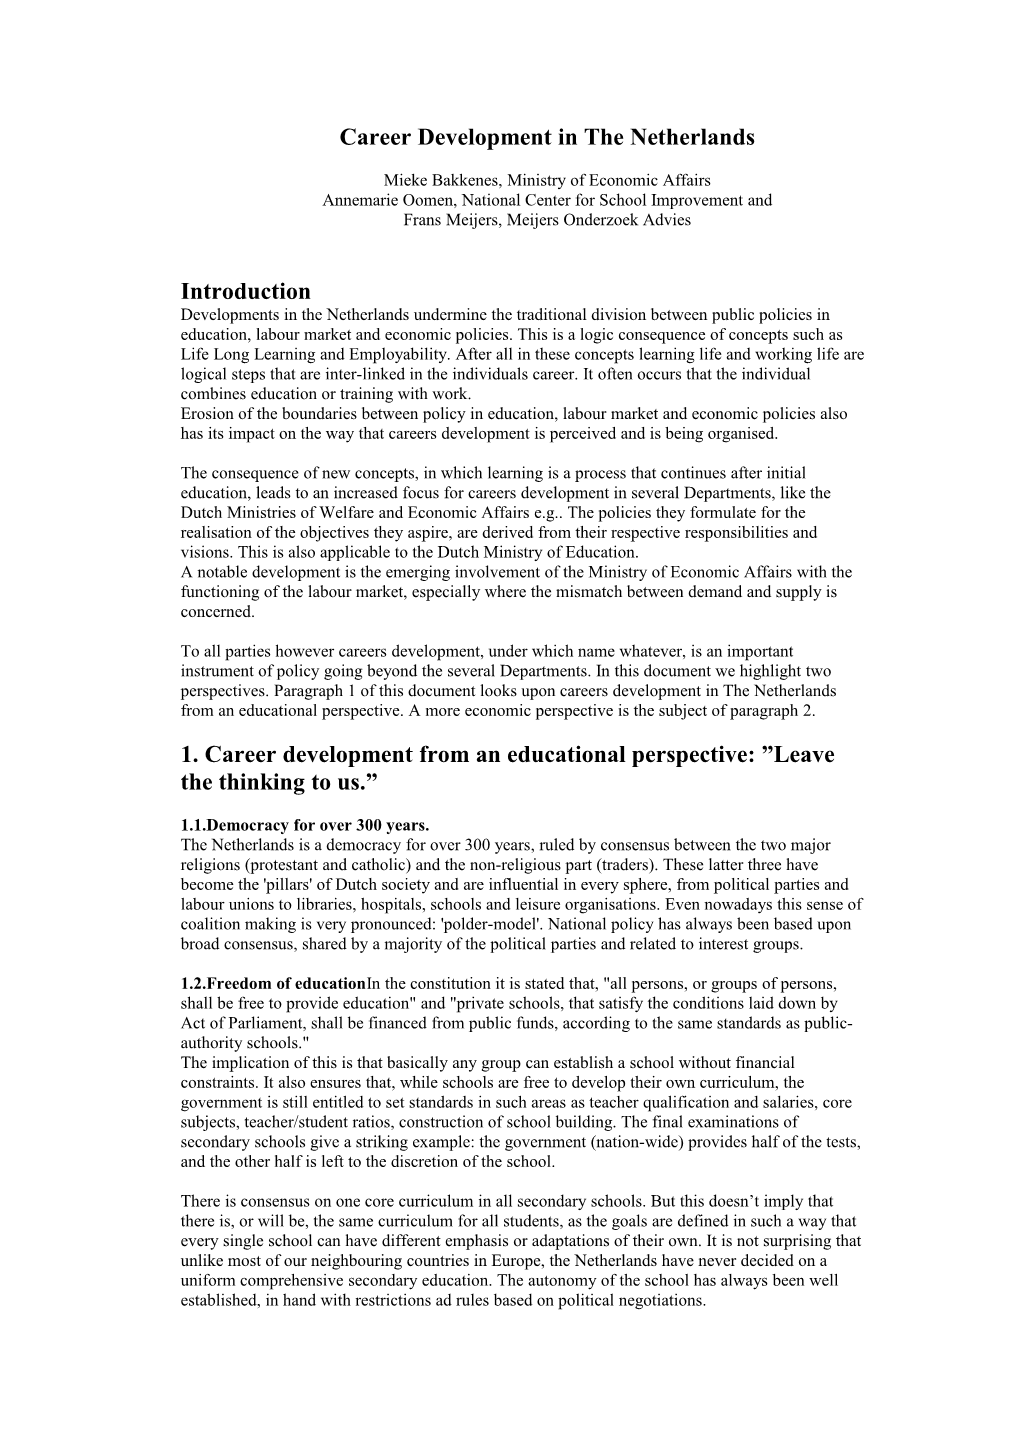 Paper for Career Development and Public Policy Symposium 2001